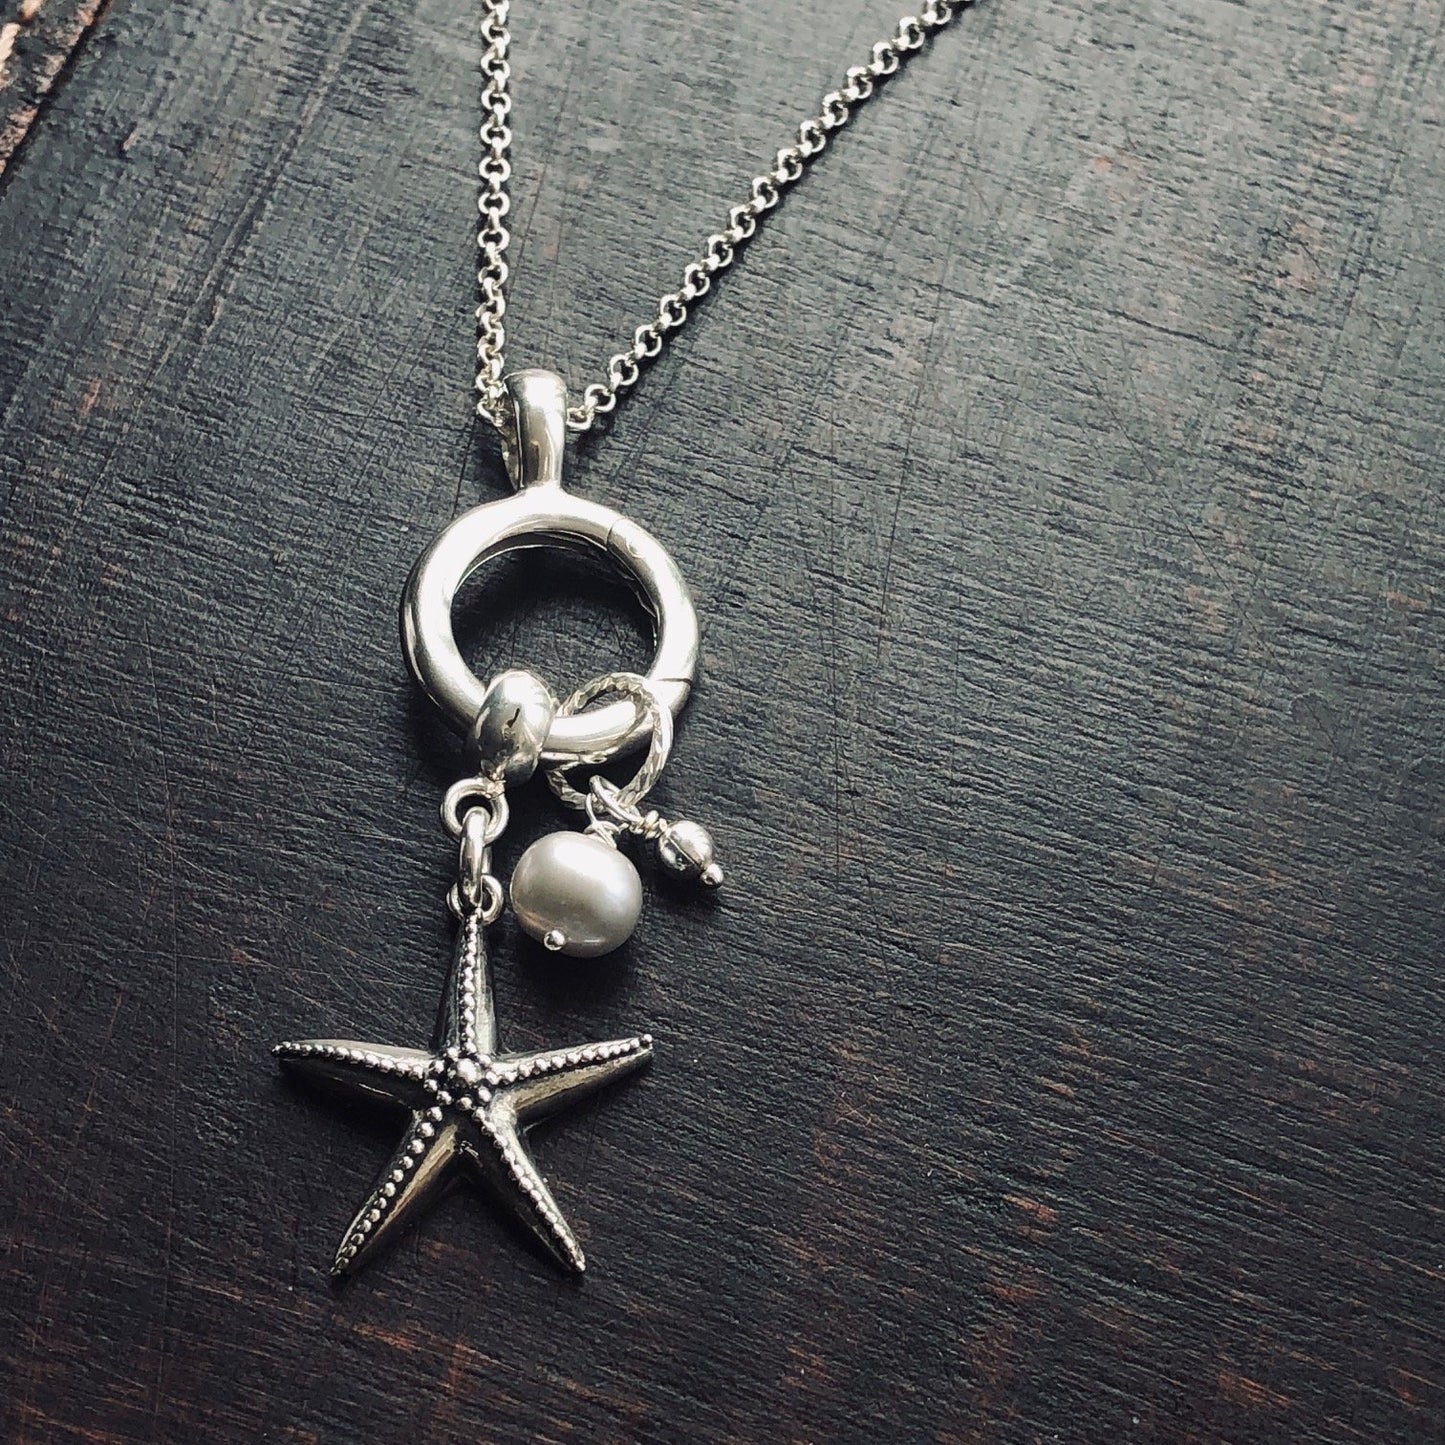 Tasha Necklace ~ For Charms